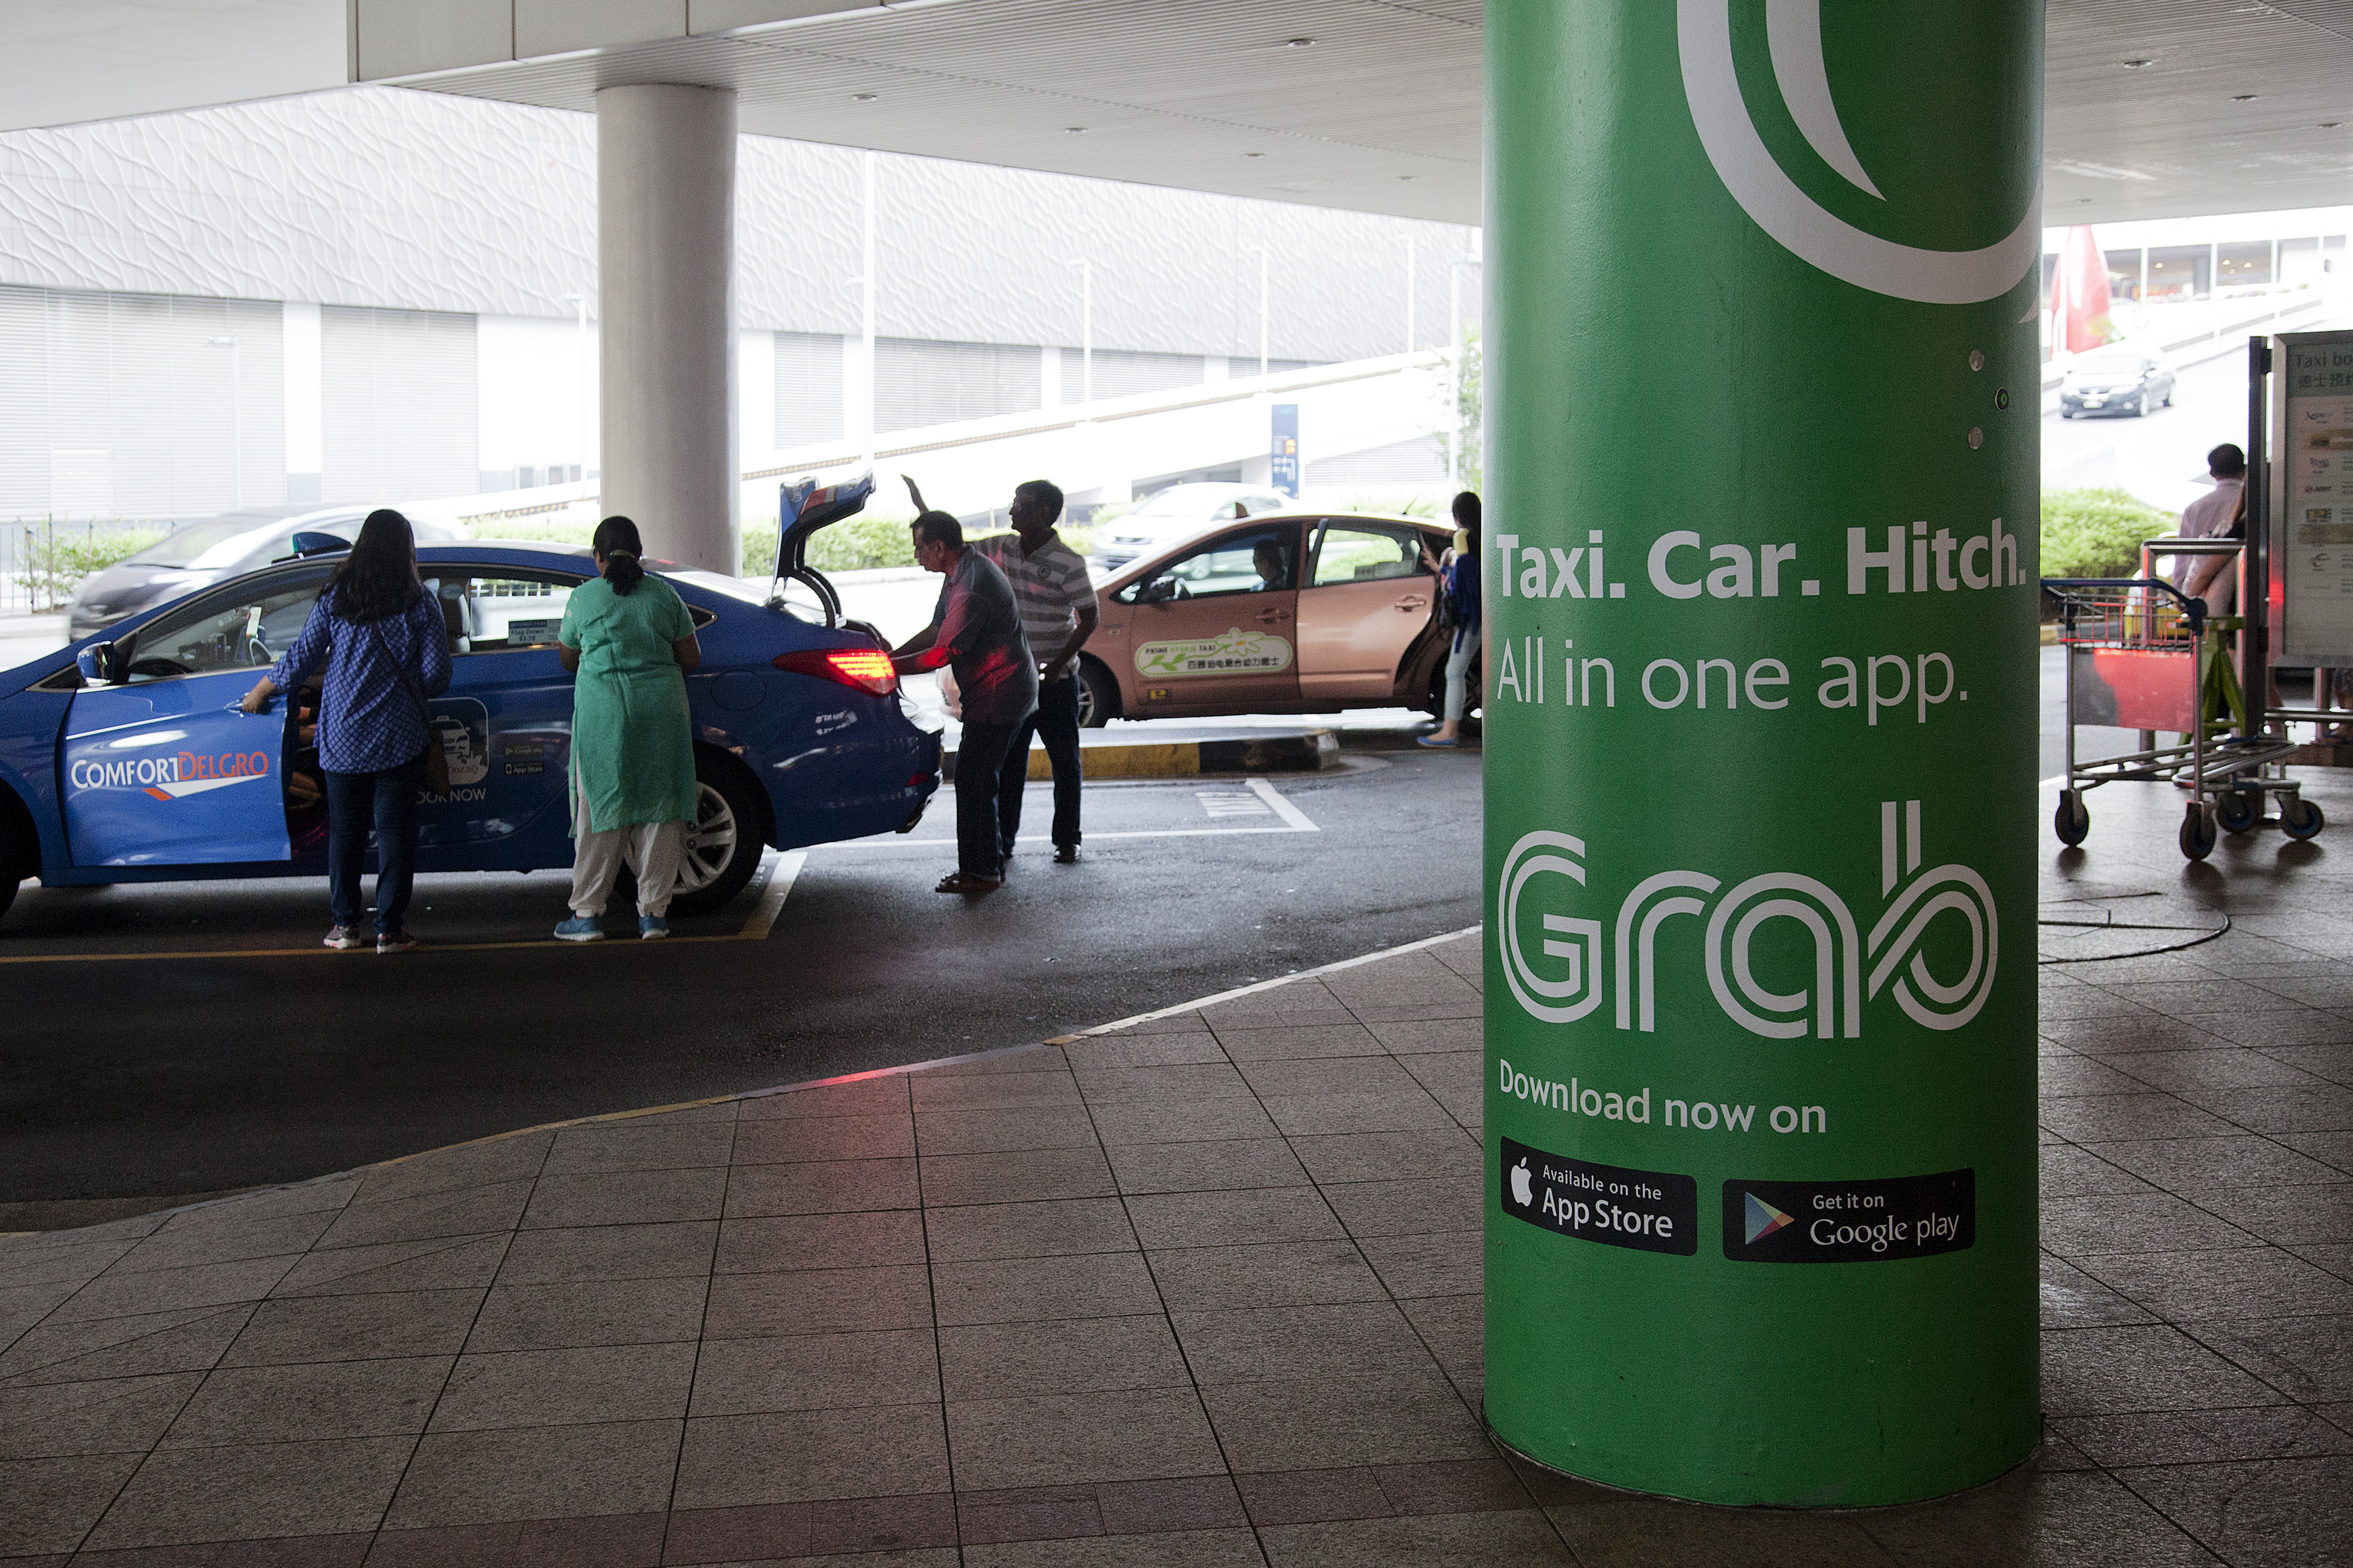 Grab to Acquire Uber: What Does it Mean For Consumers?